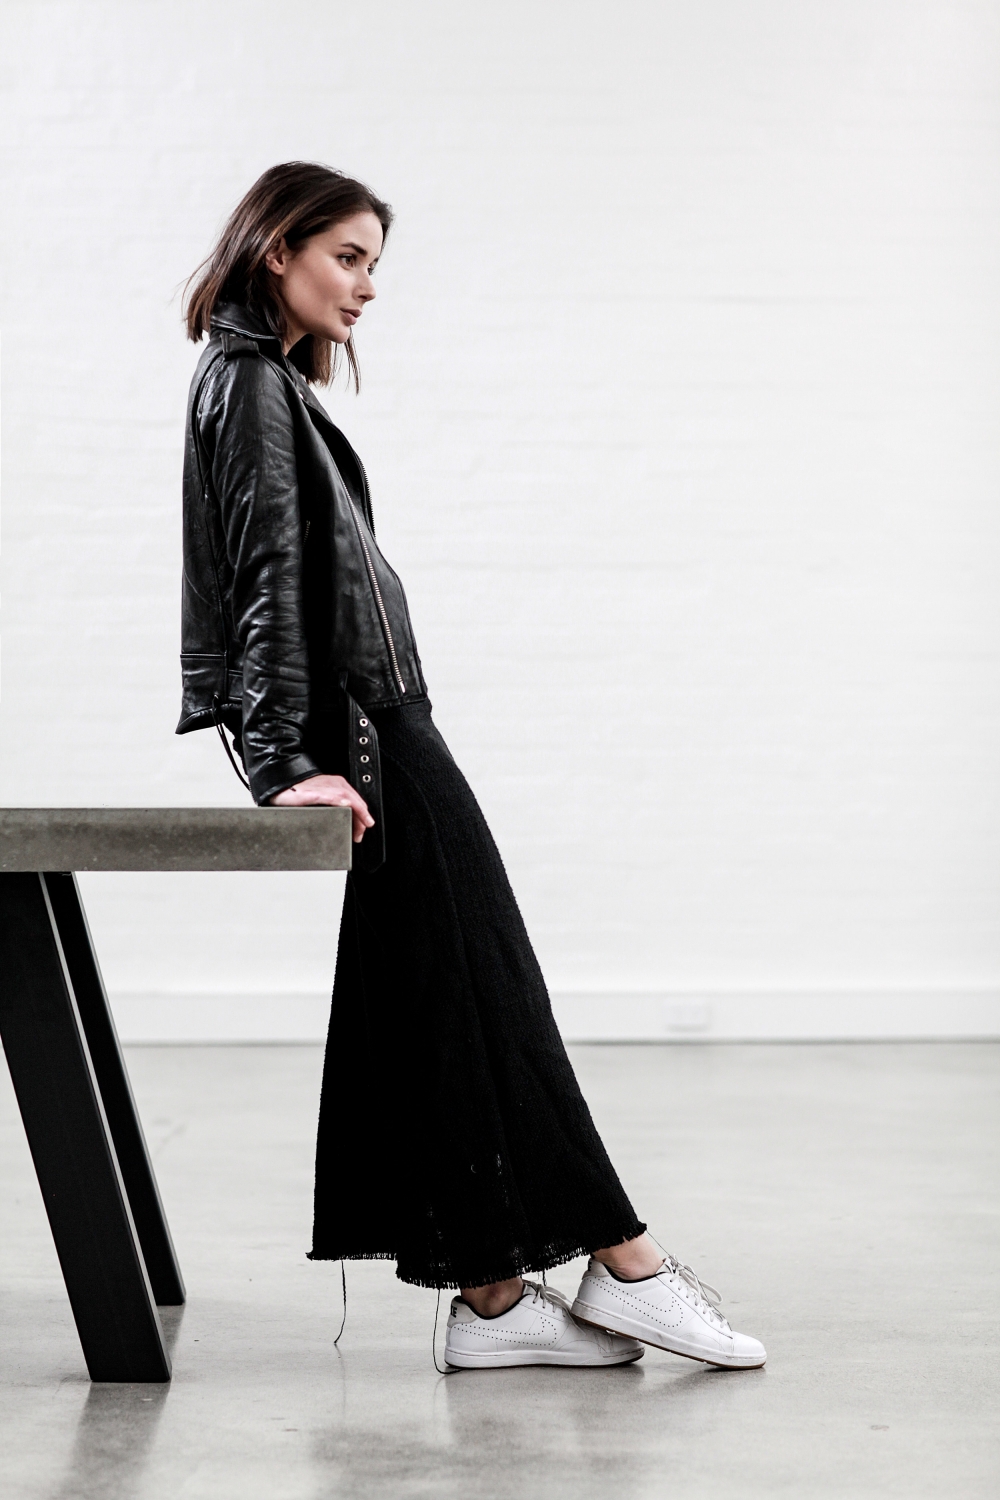 Black dress | Leather Jacket | Minimal | Layering | Matin |Style | Outfit | Harper and Harley